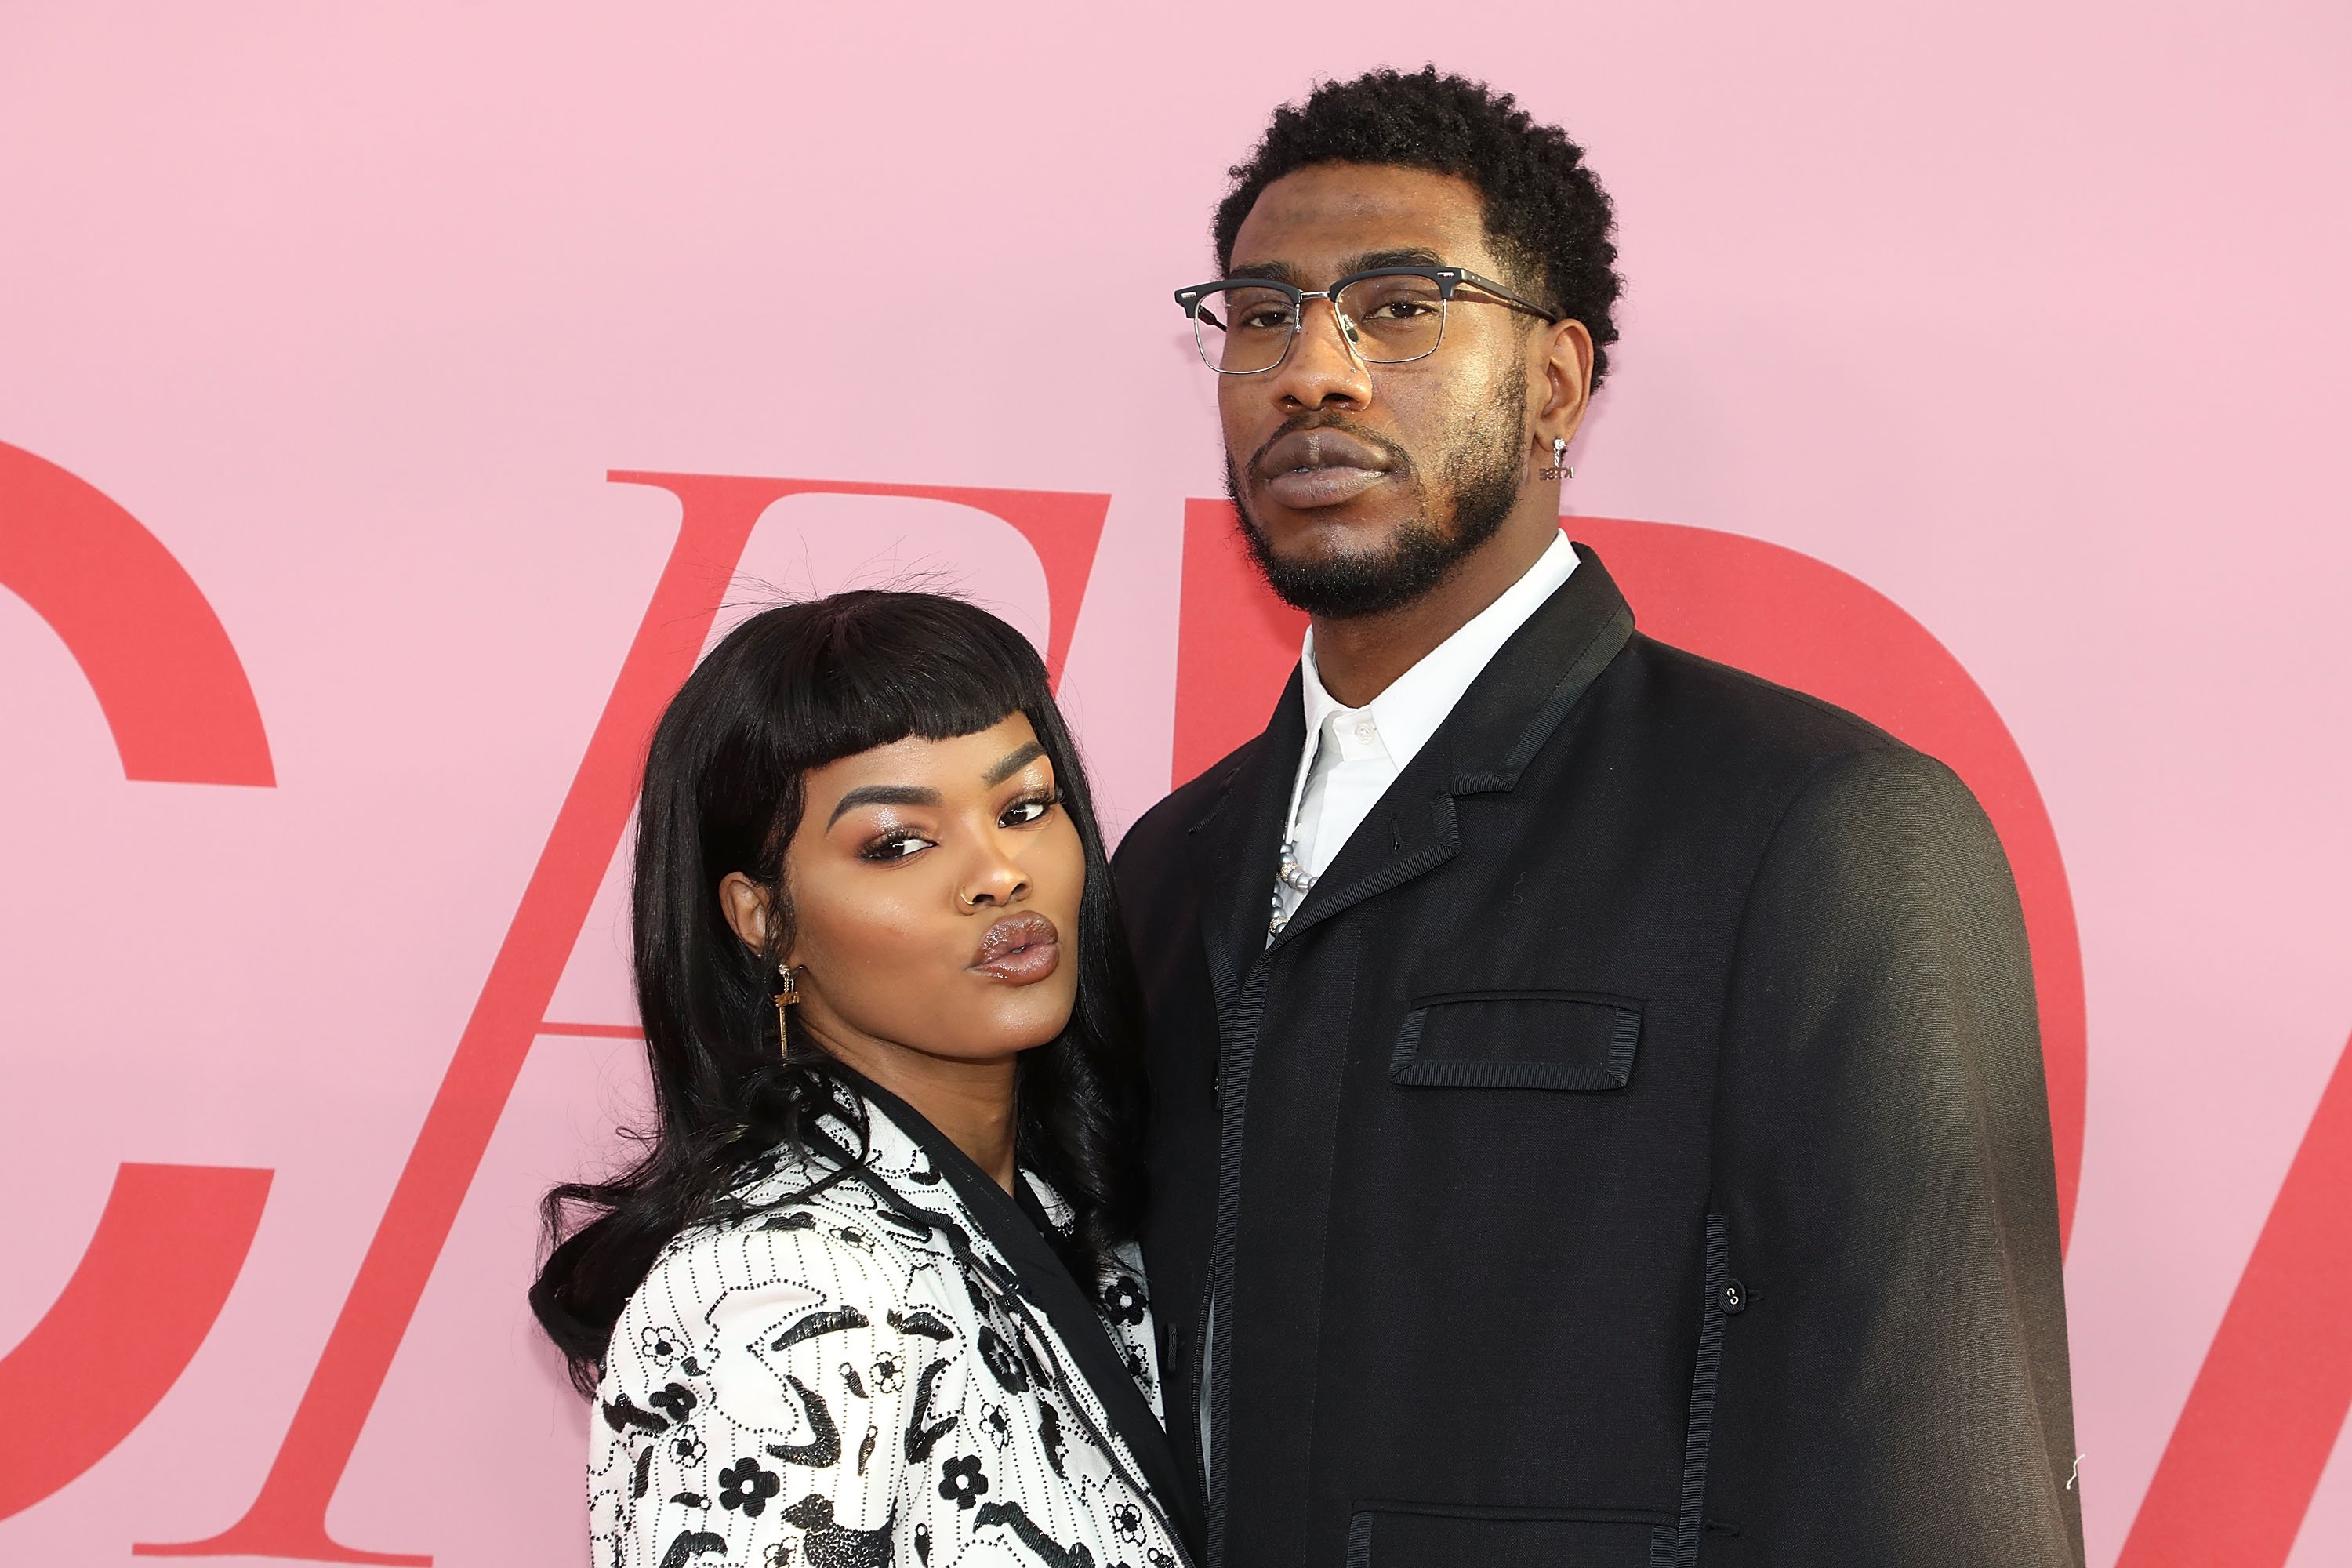 Teyana Taylor and Iman Shumpert at the 2019 CFDA Awards on June 3, 2019. | Photo: Getty Images